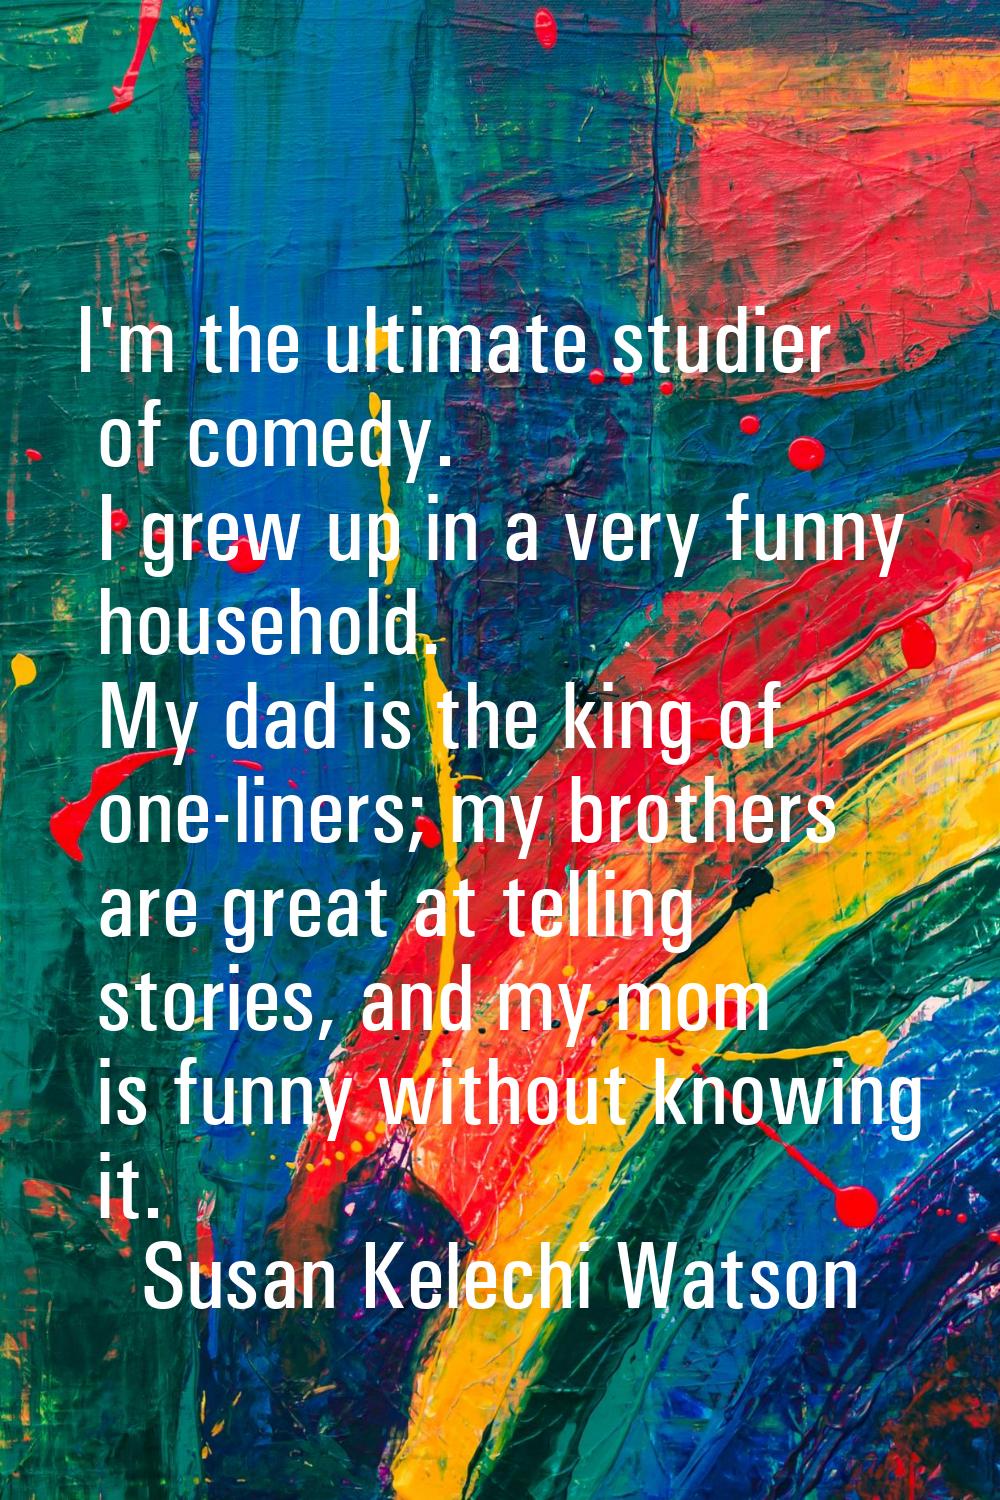 I'm the ultimate studier of comedy. I grew up in a very funny household. My dad is the king of one-